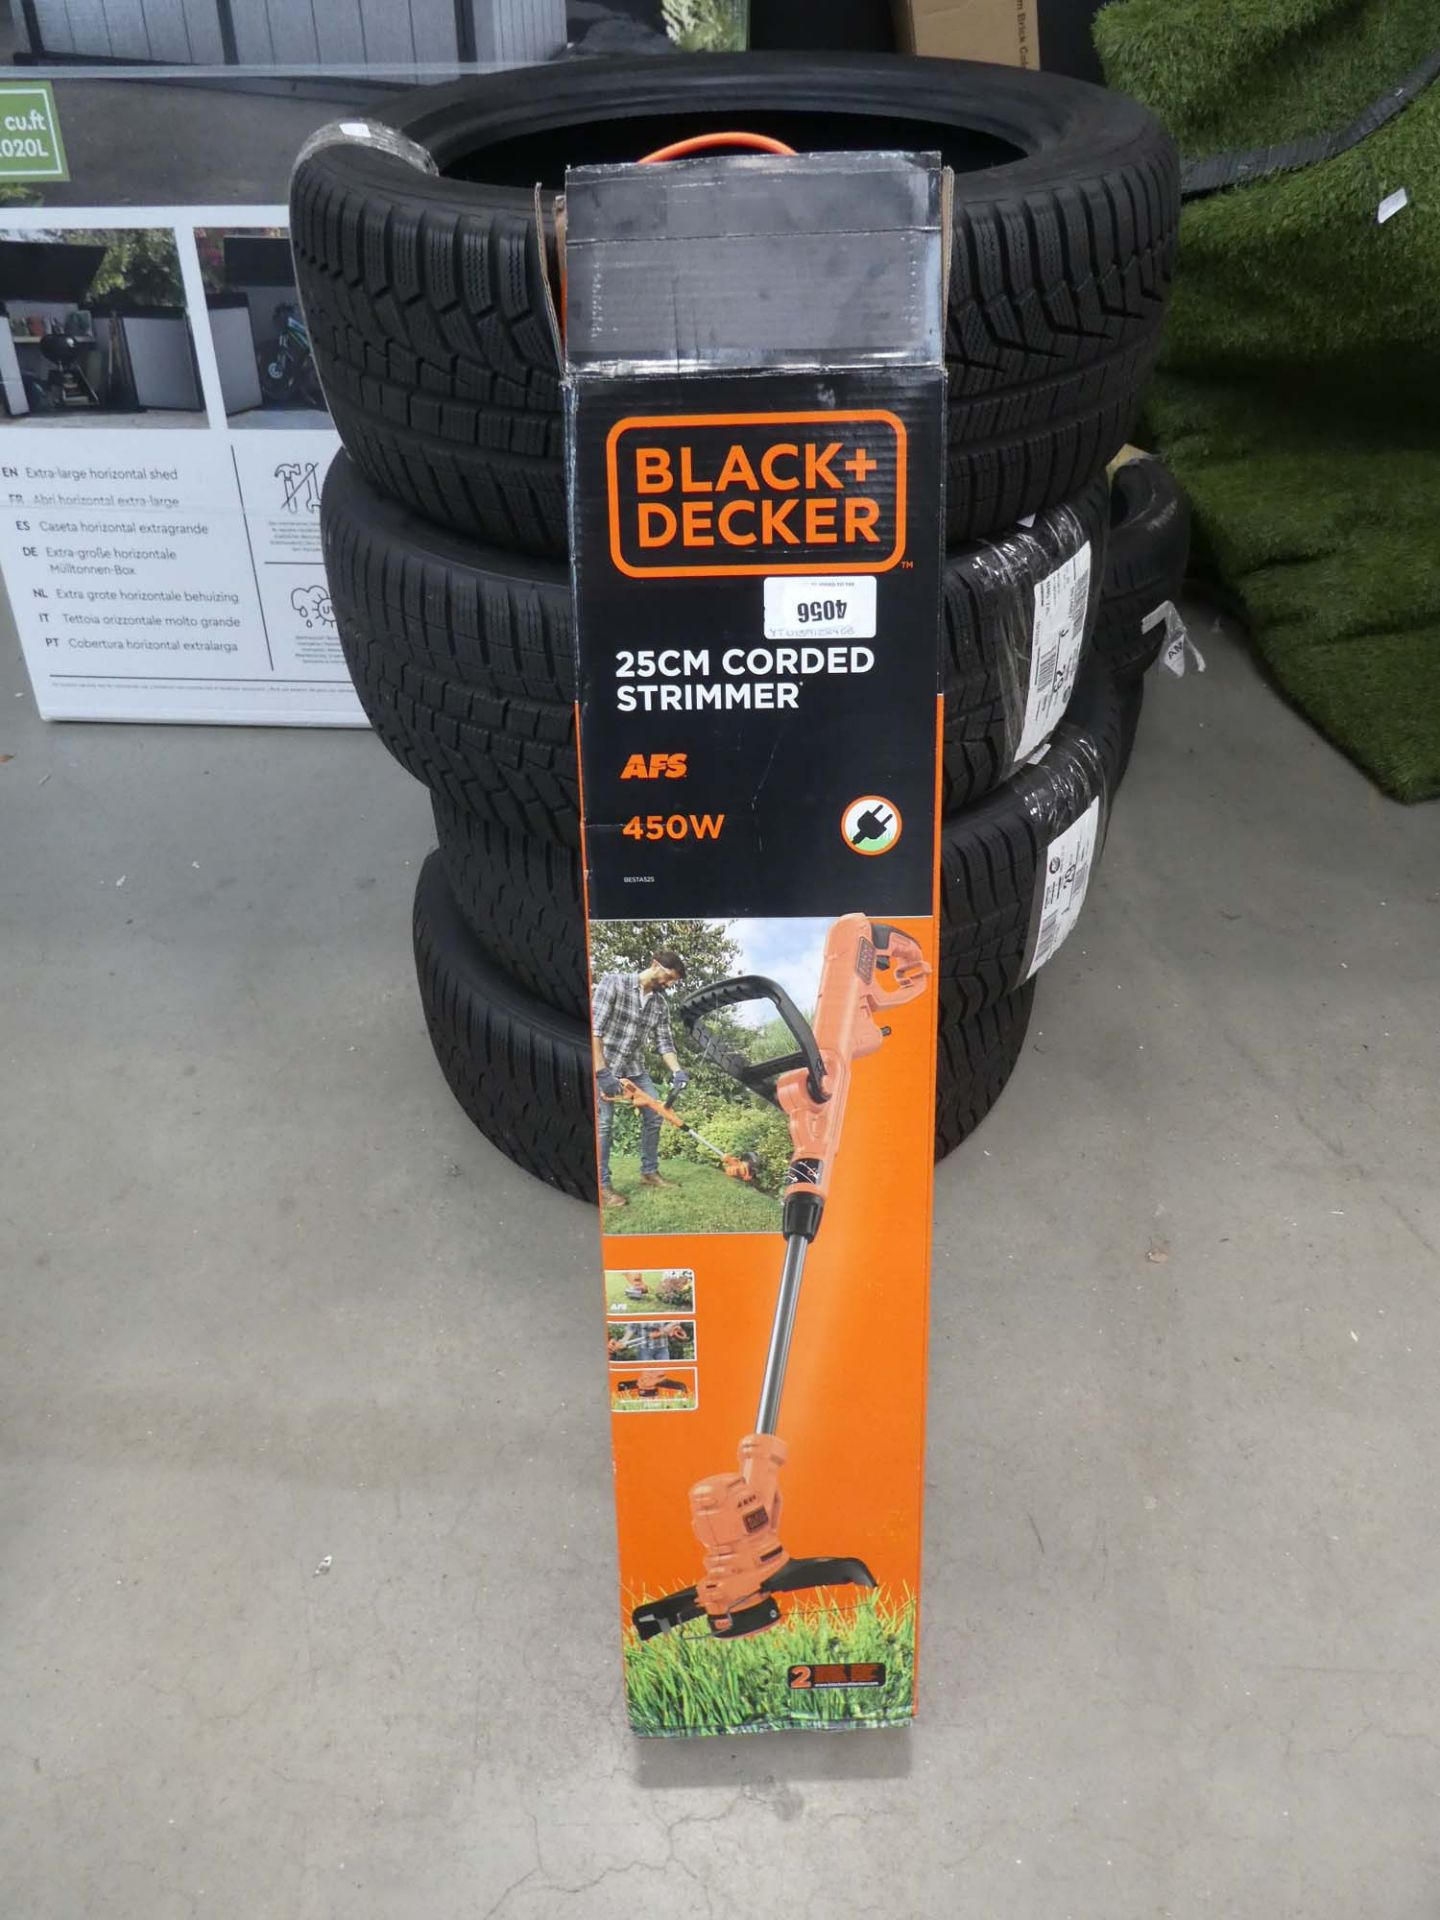 Black & Decker boxed electric strimmer